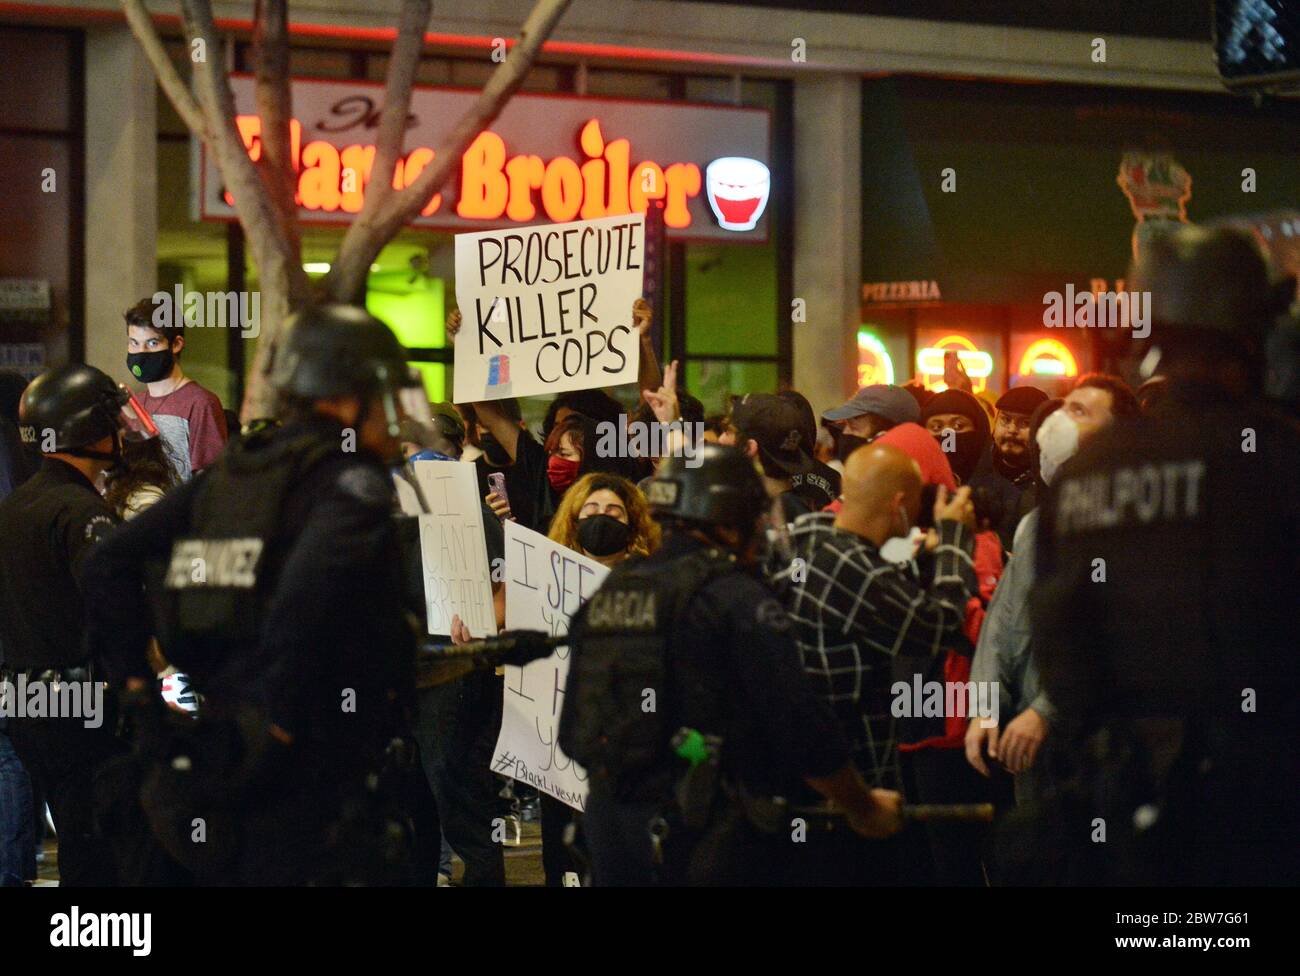 Los Angeles, United States. 29th May, 2020. Protesters demonstrating against the the killing of George Floyd clash for hours with police on the streets of downtown Los Angeles, blocking the 110 Freeway, vandalizing cars and property and getting into a series of tense altercations with officers on Friday, May 29, 2020. At least four LAPD officers were hurt, some after being hit by debris. Multiple arrests were made. By midnight, the situation had deteriorated as several jewelry stores were broken into and looted along with a CVS drug store. Photo by Jim Ruymen/UPI Credit: UPI/Alamy Live News Stock Photo